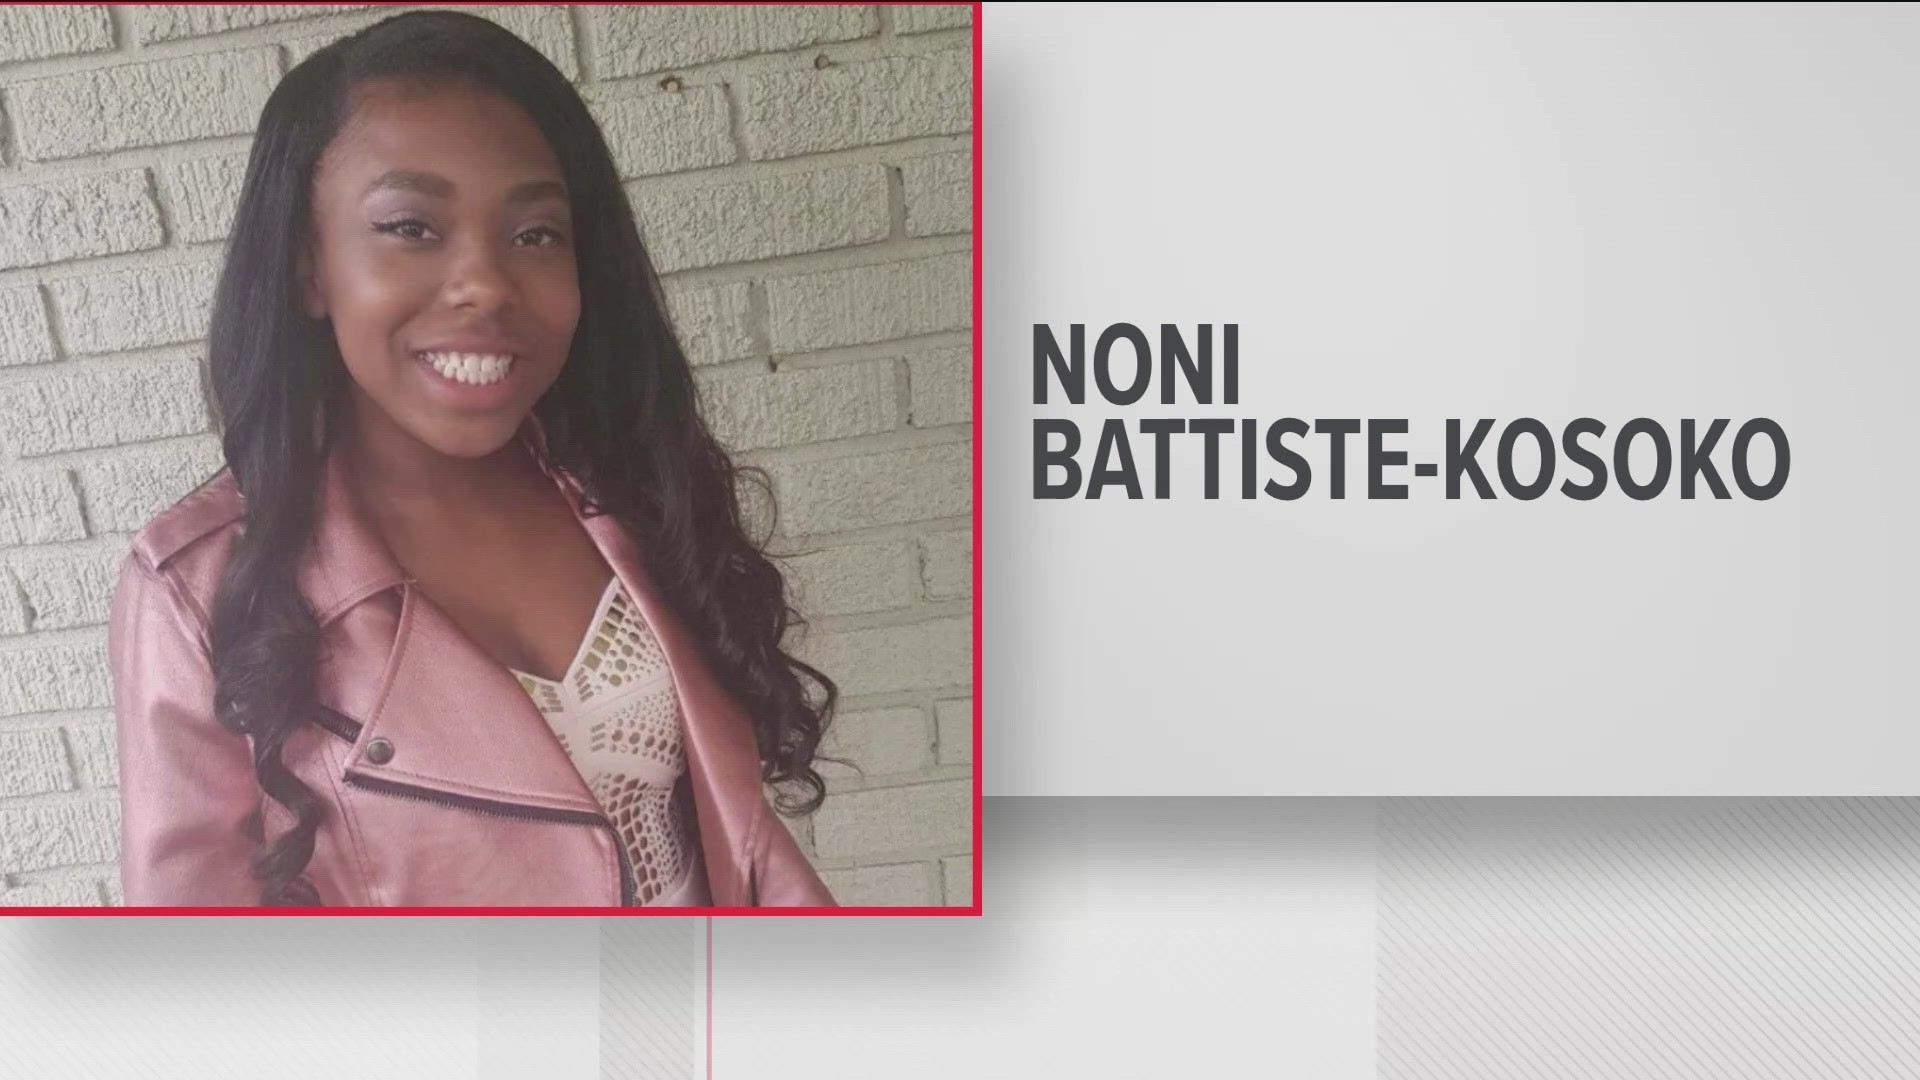 Attorneys said that Noni Battiste-Kosoko had been held for 3 months on misdemeanor charges.